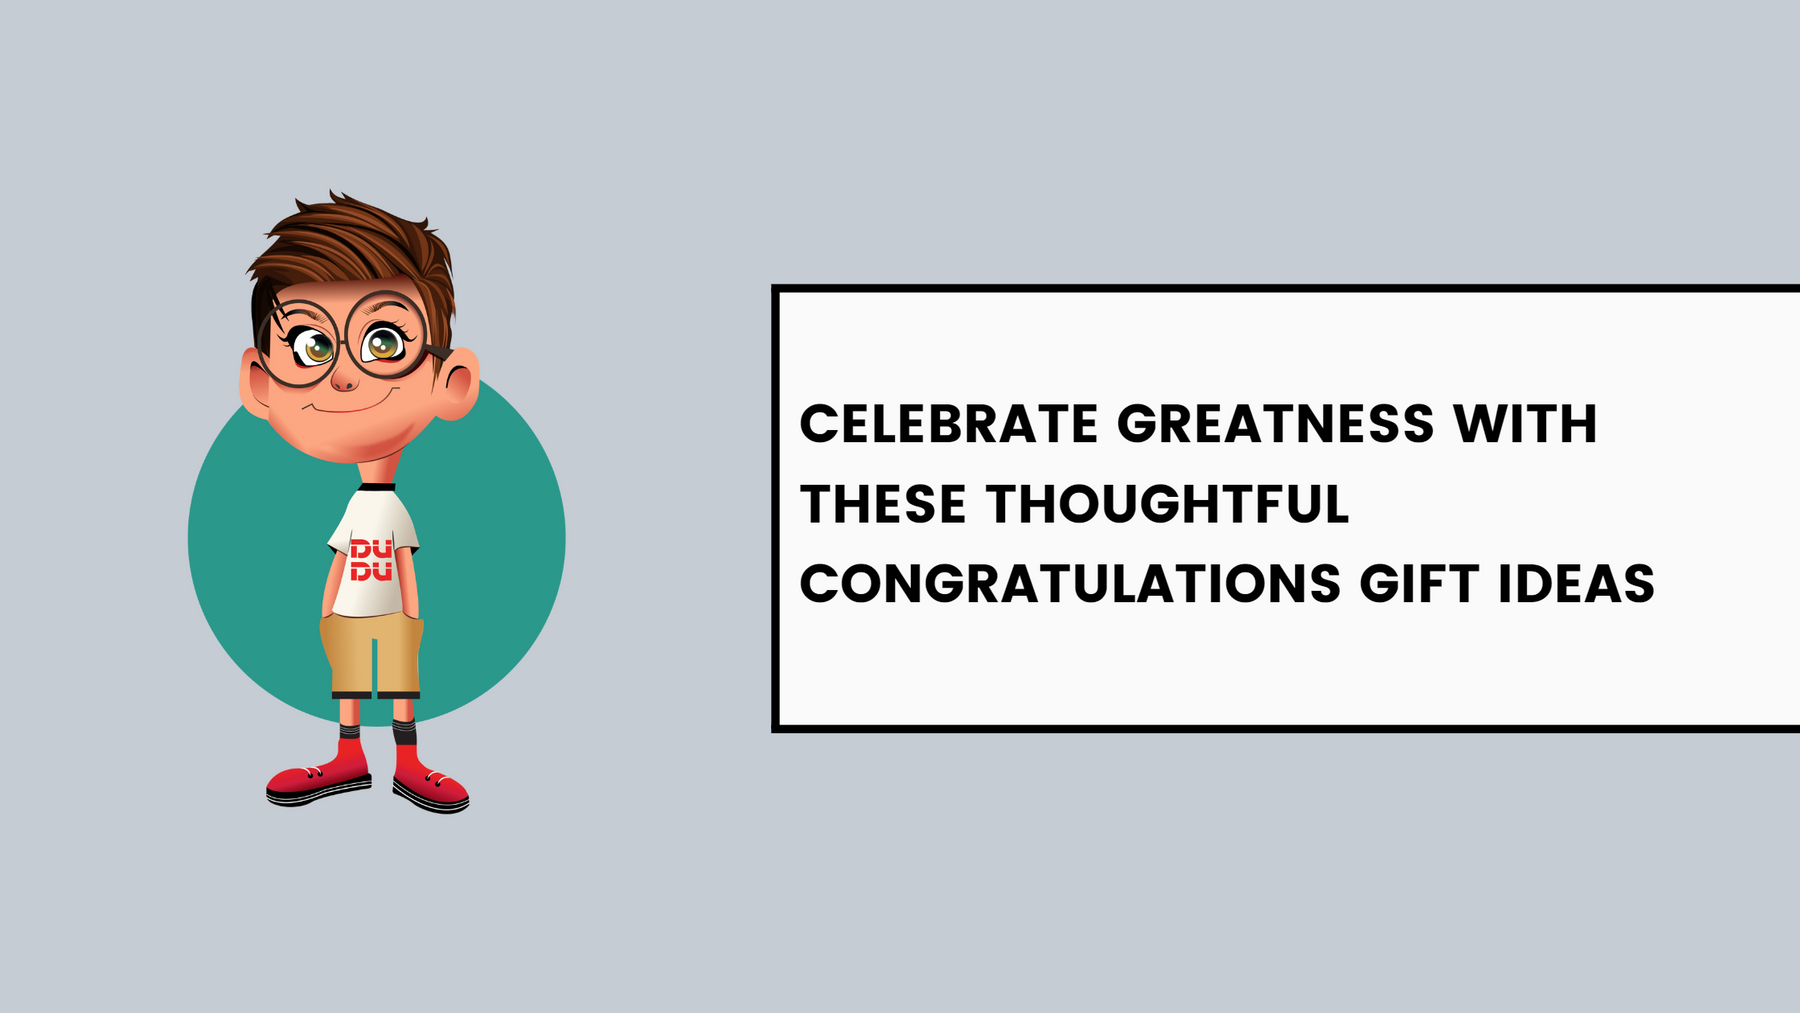 Celebrate Greatness with These Thoughtful Congratulations Gift Ideas